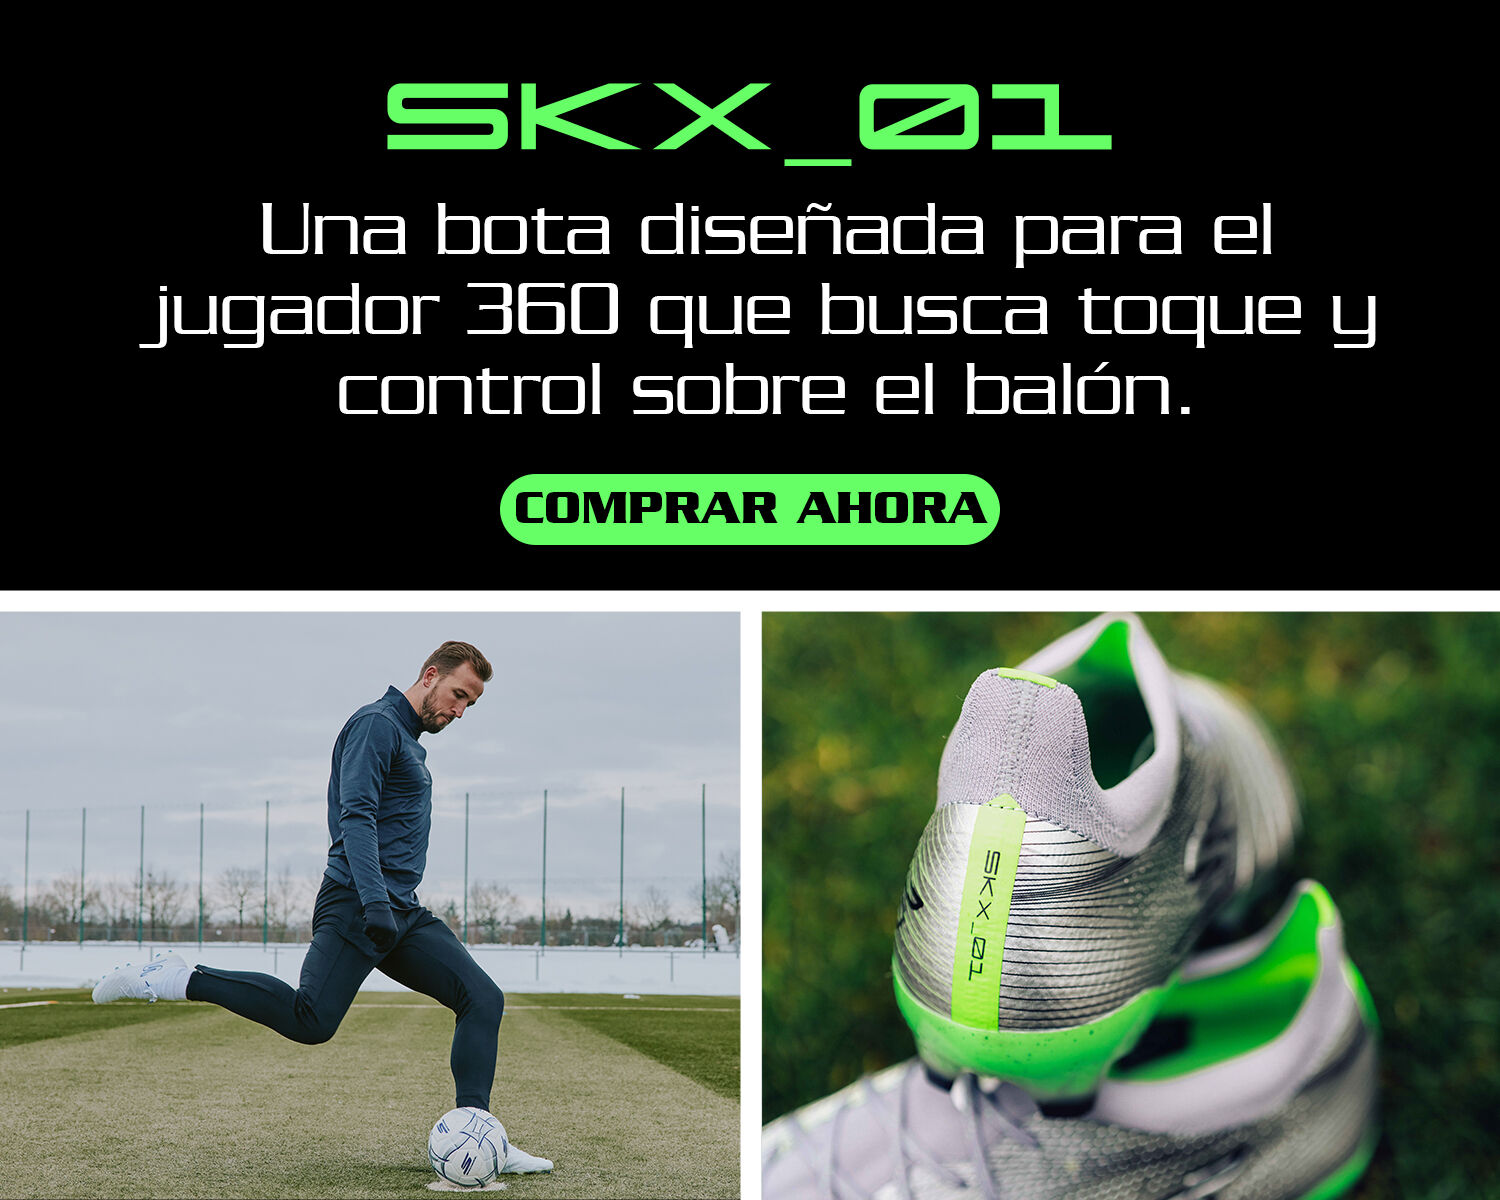 Laser-Comfort SKX_01 Football. A boot designed for the player who eants 360 touch and control on the ball.